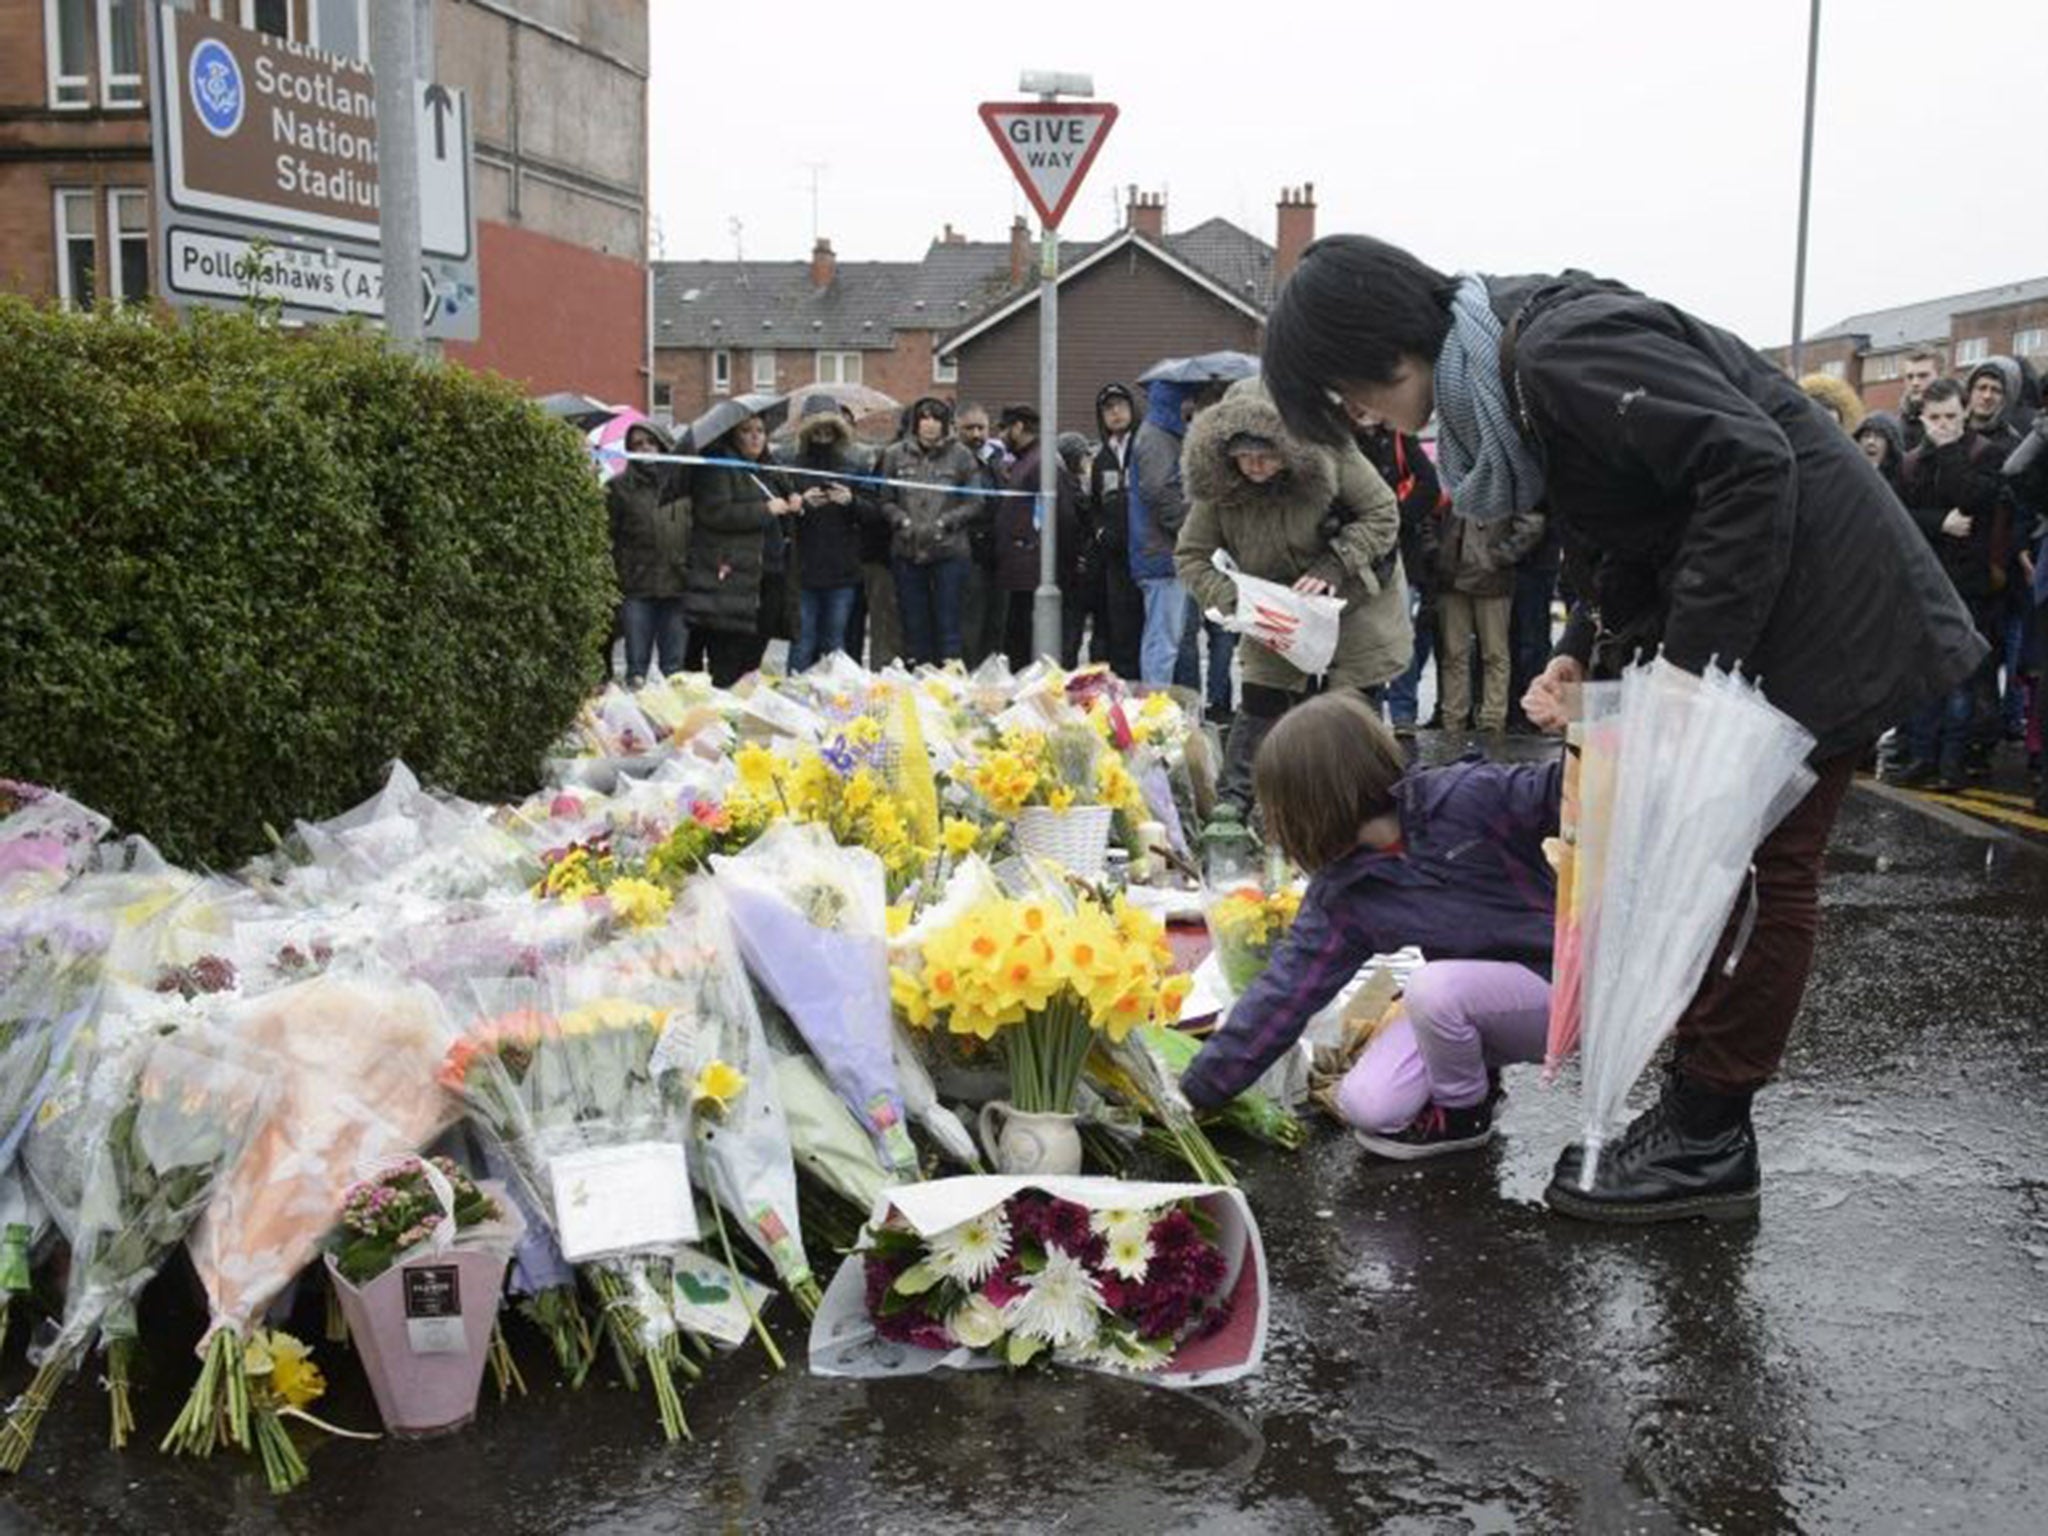 People have been leaving tributes to the shopkeeper since his death on Thursday evening